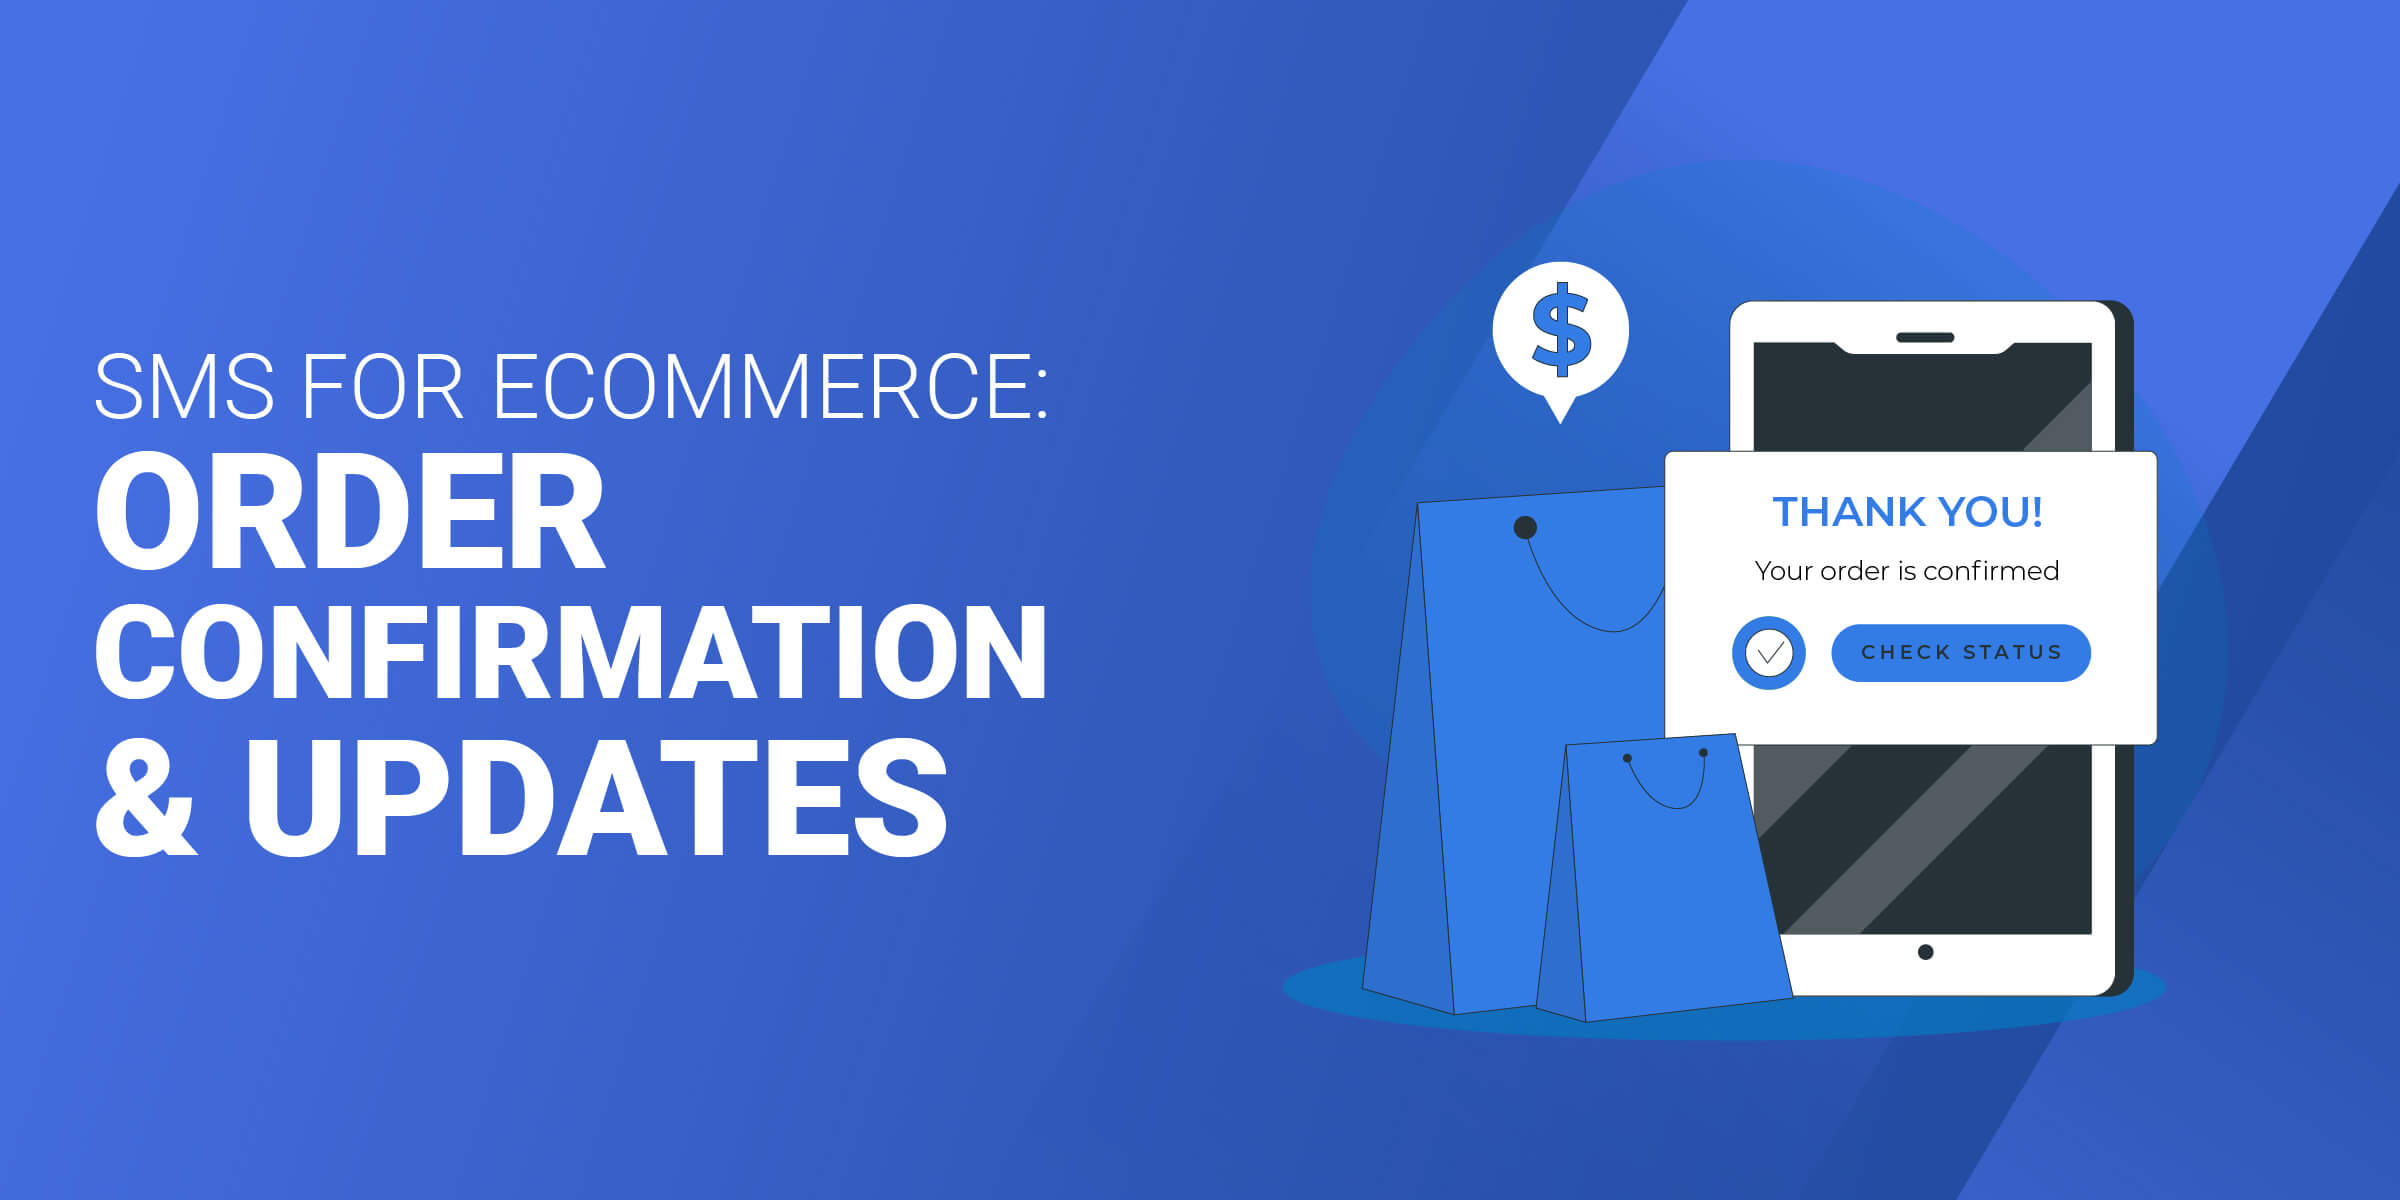 SMS for eCommerce Order Confirmation